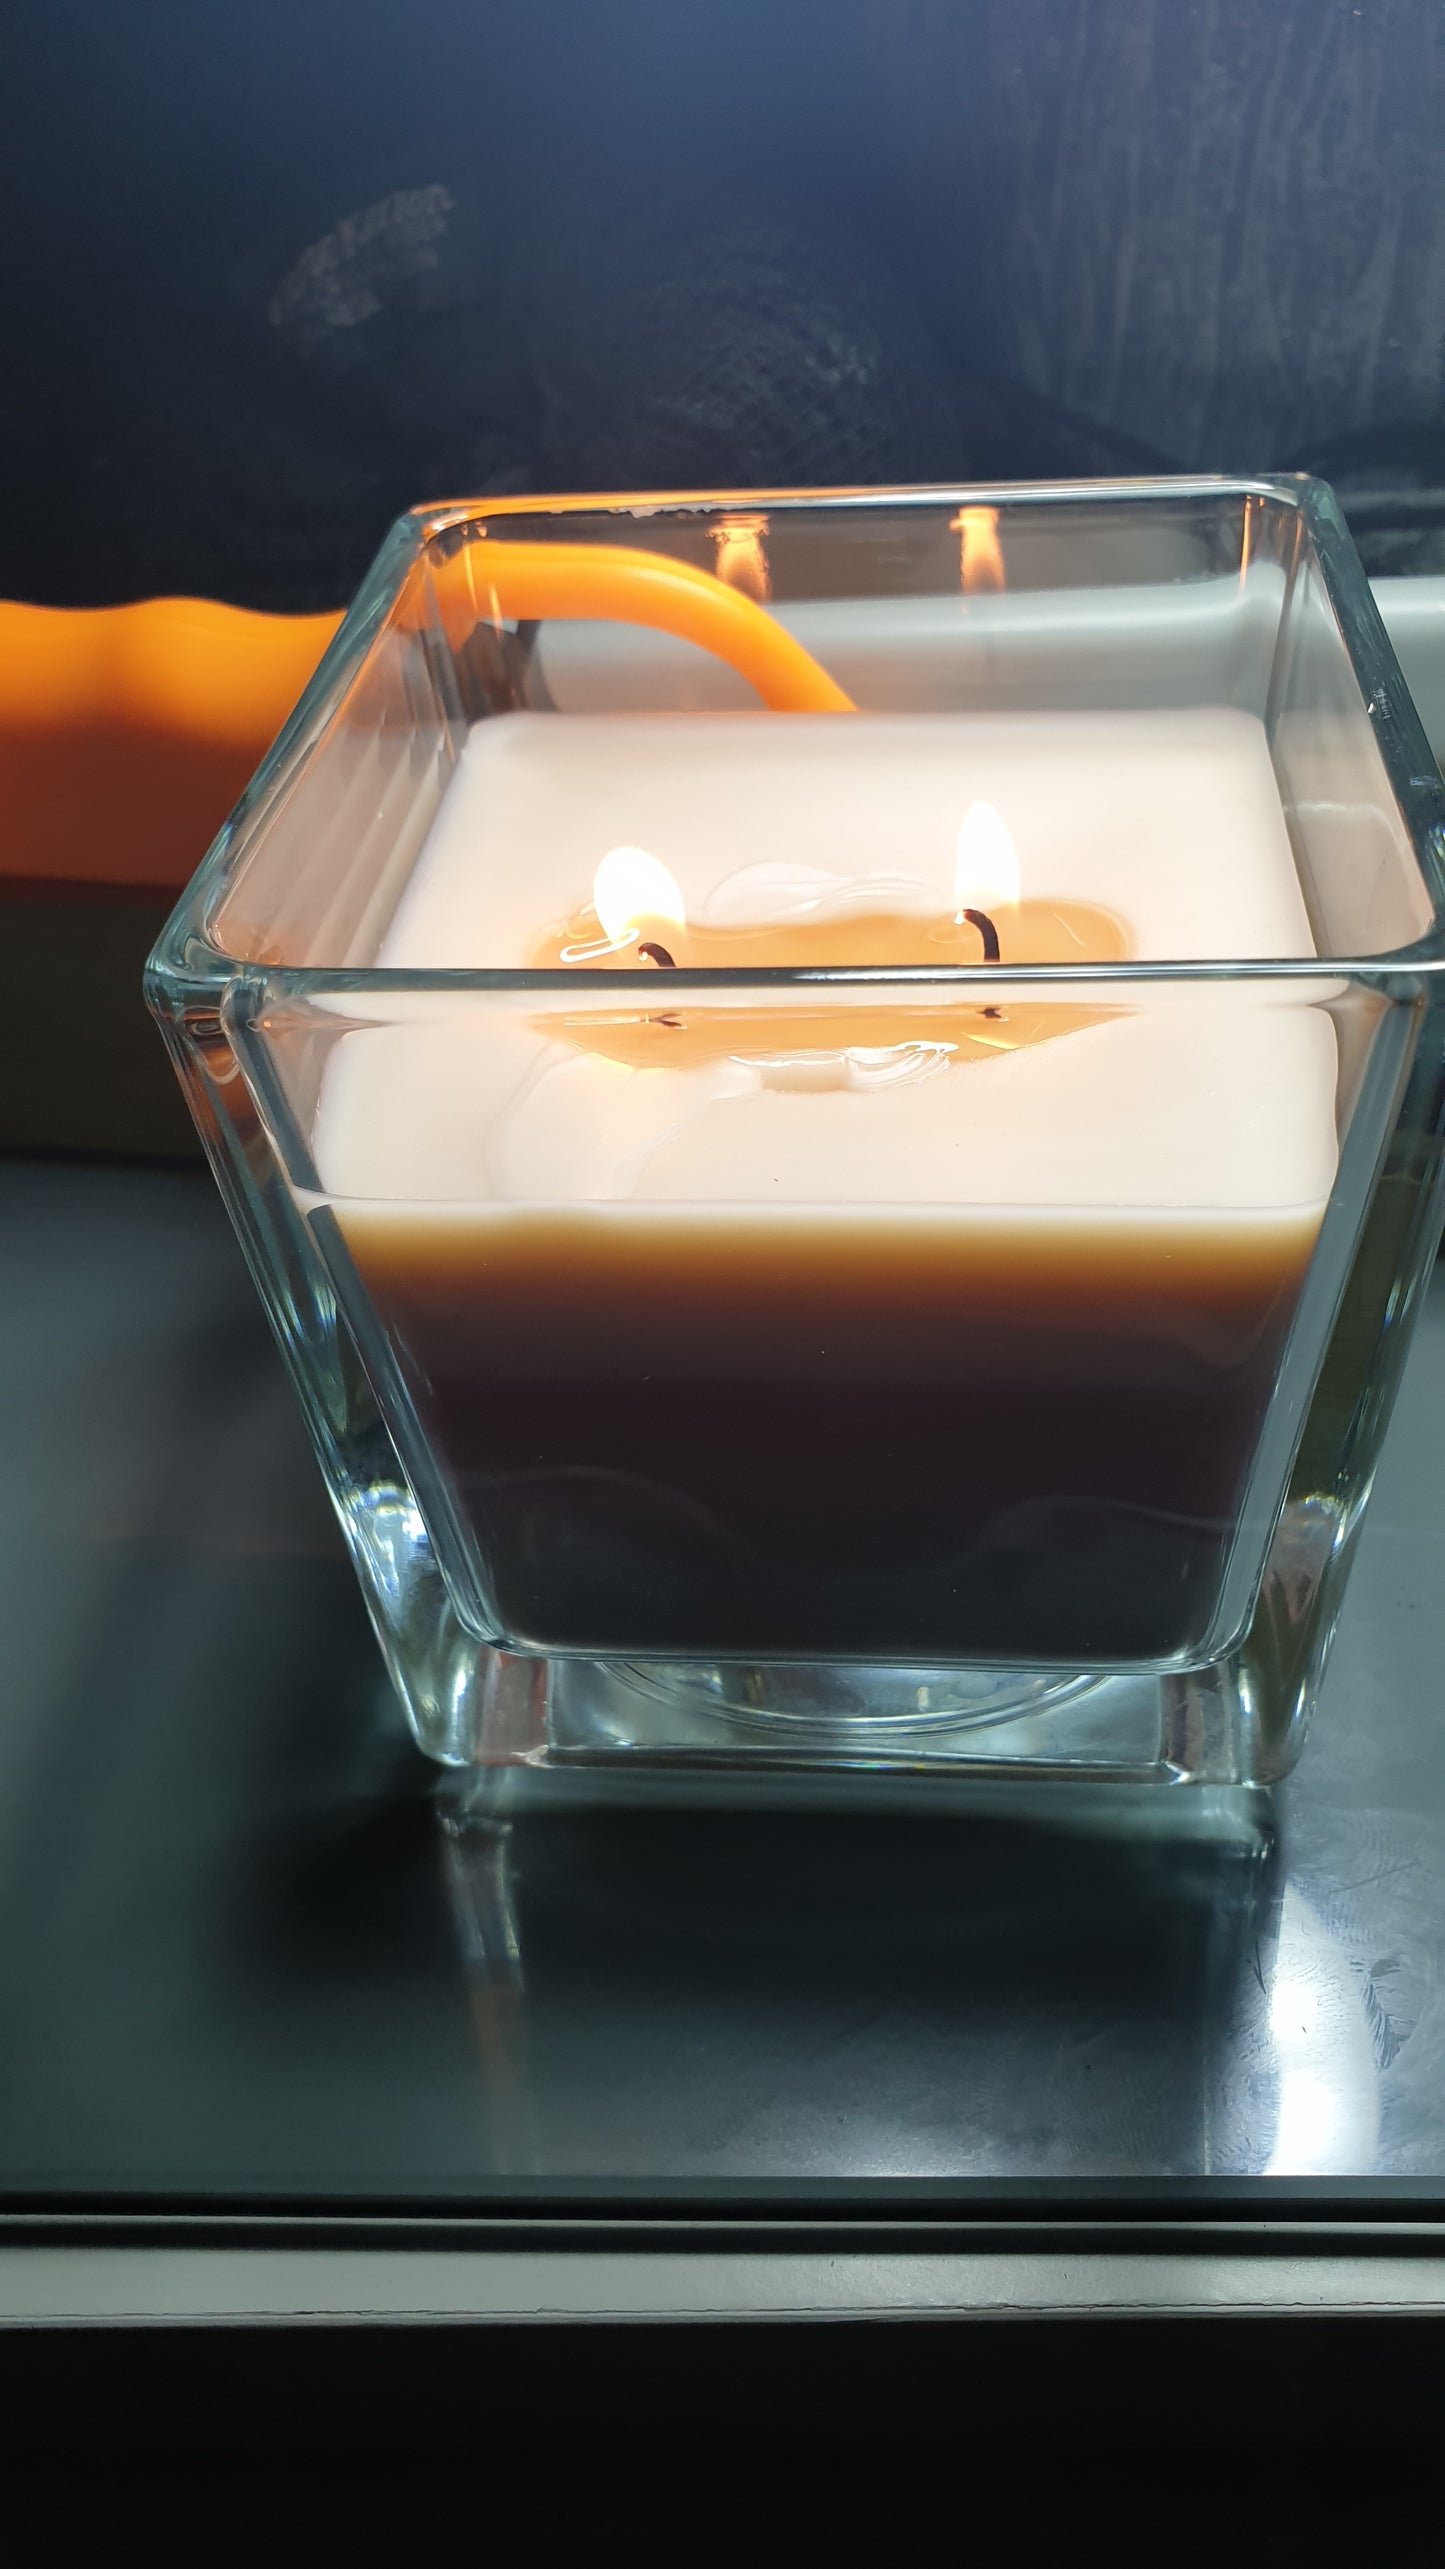 AURA APPLE AND CINNAMON SCENTED CANDLE